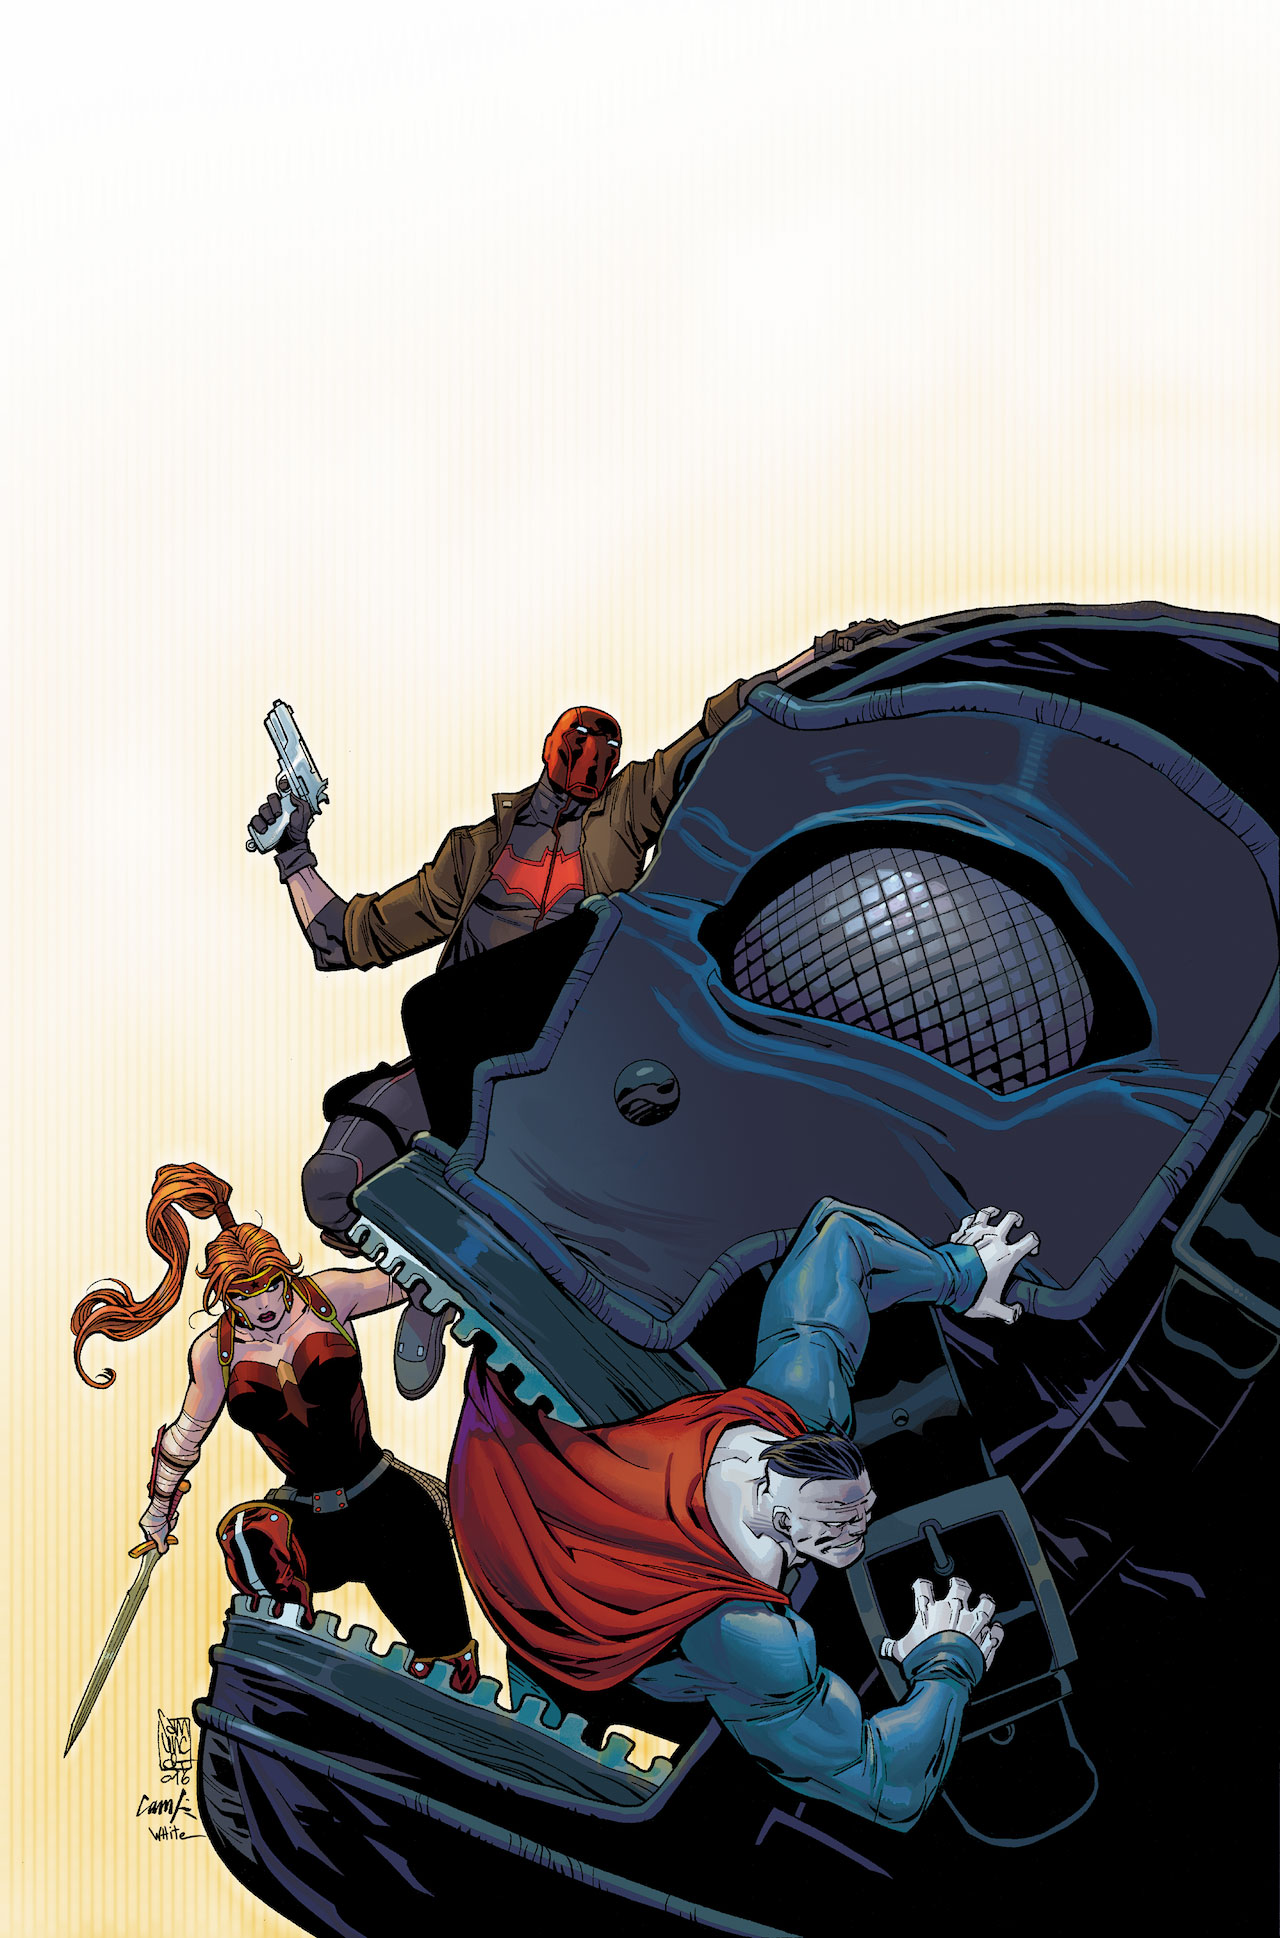 RED HOOD AND THE OUTLAWS #5